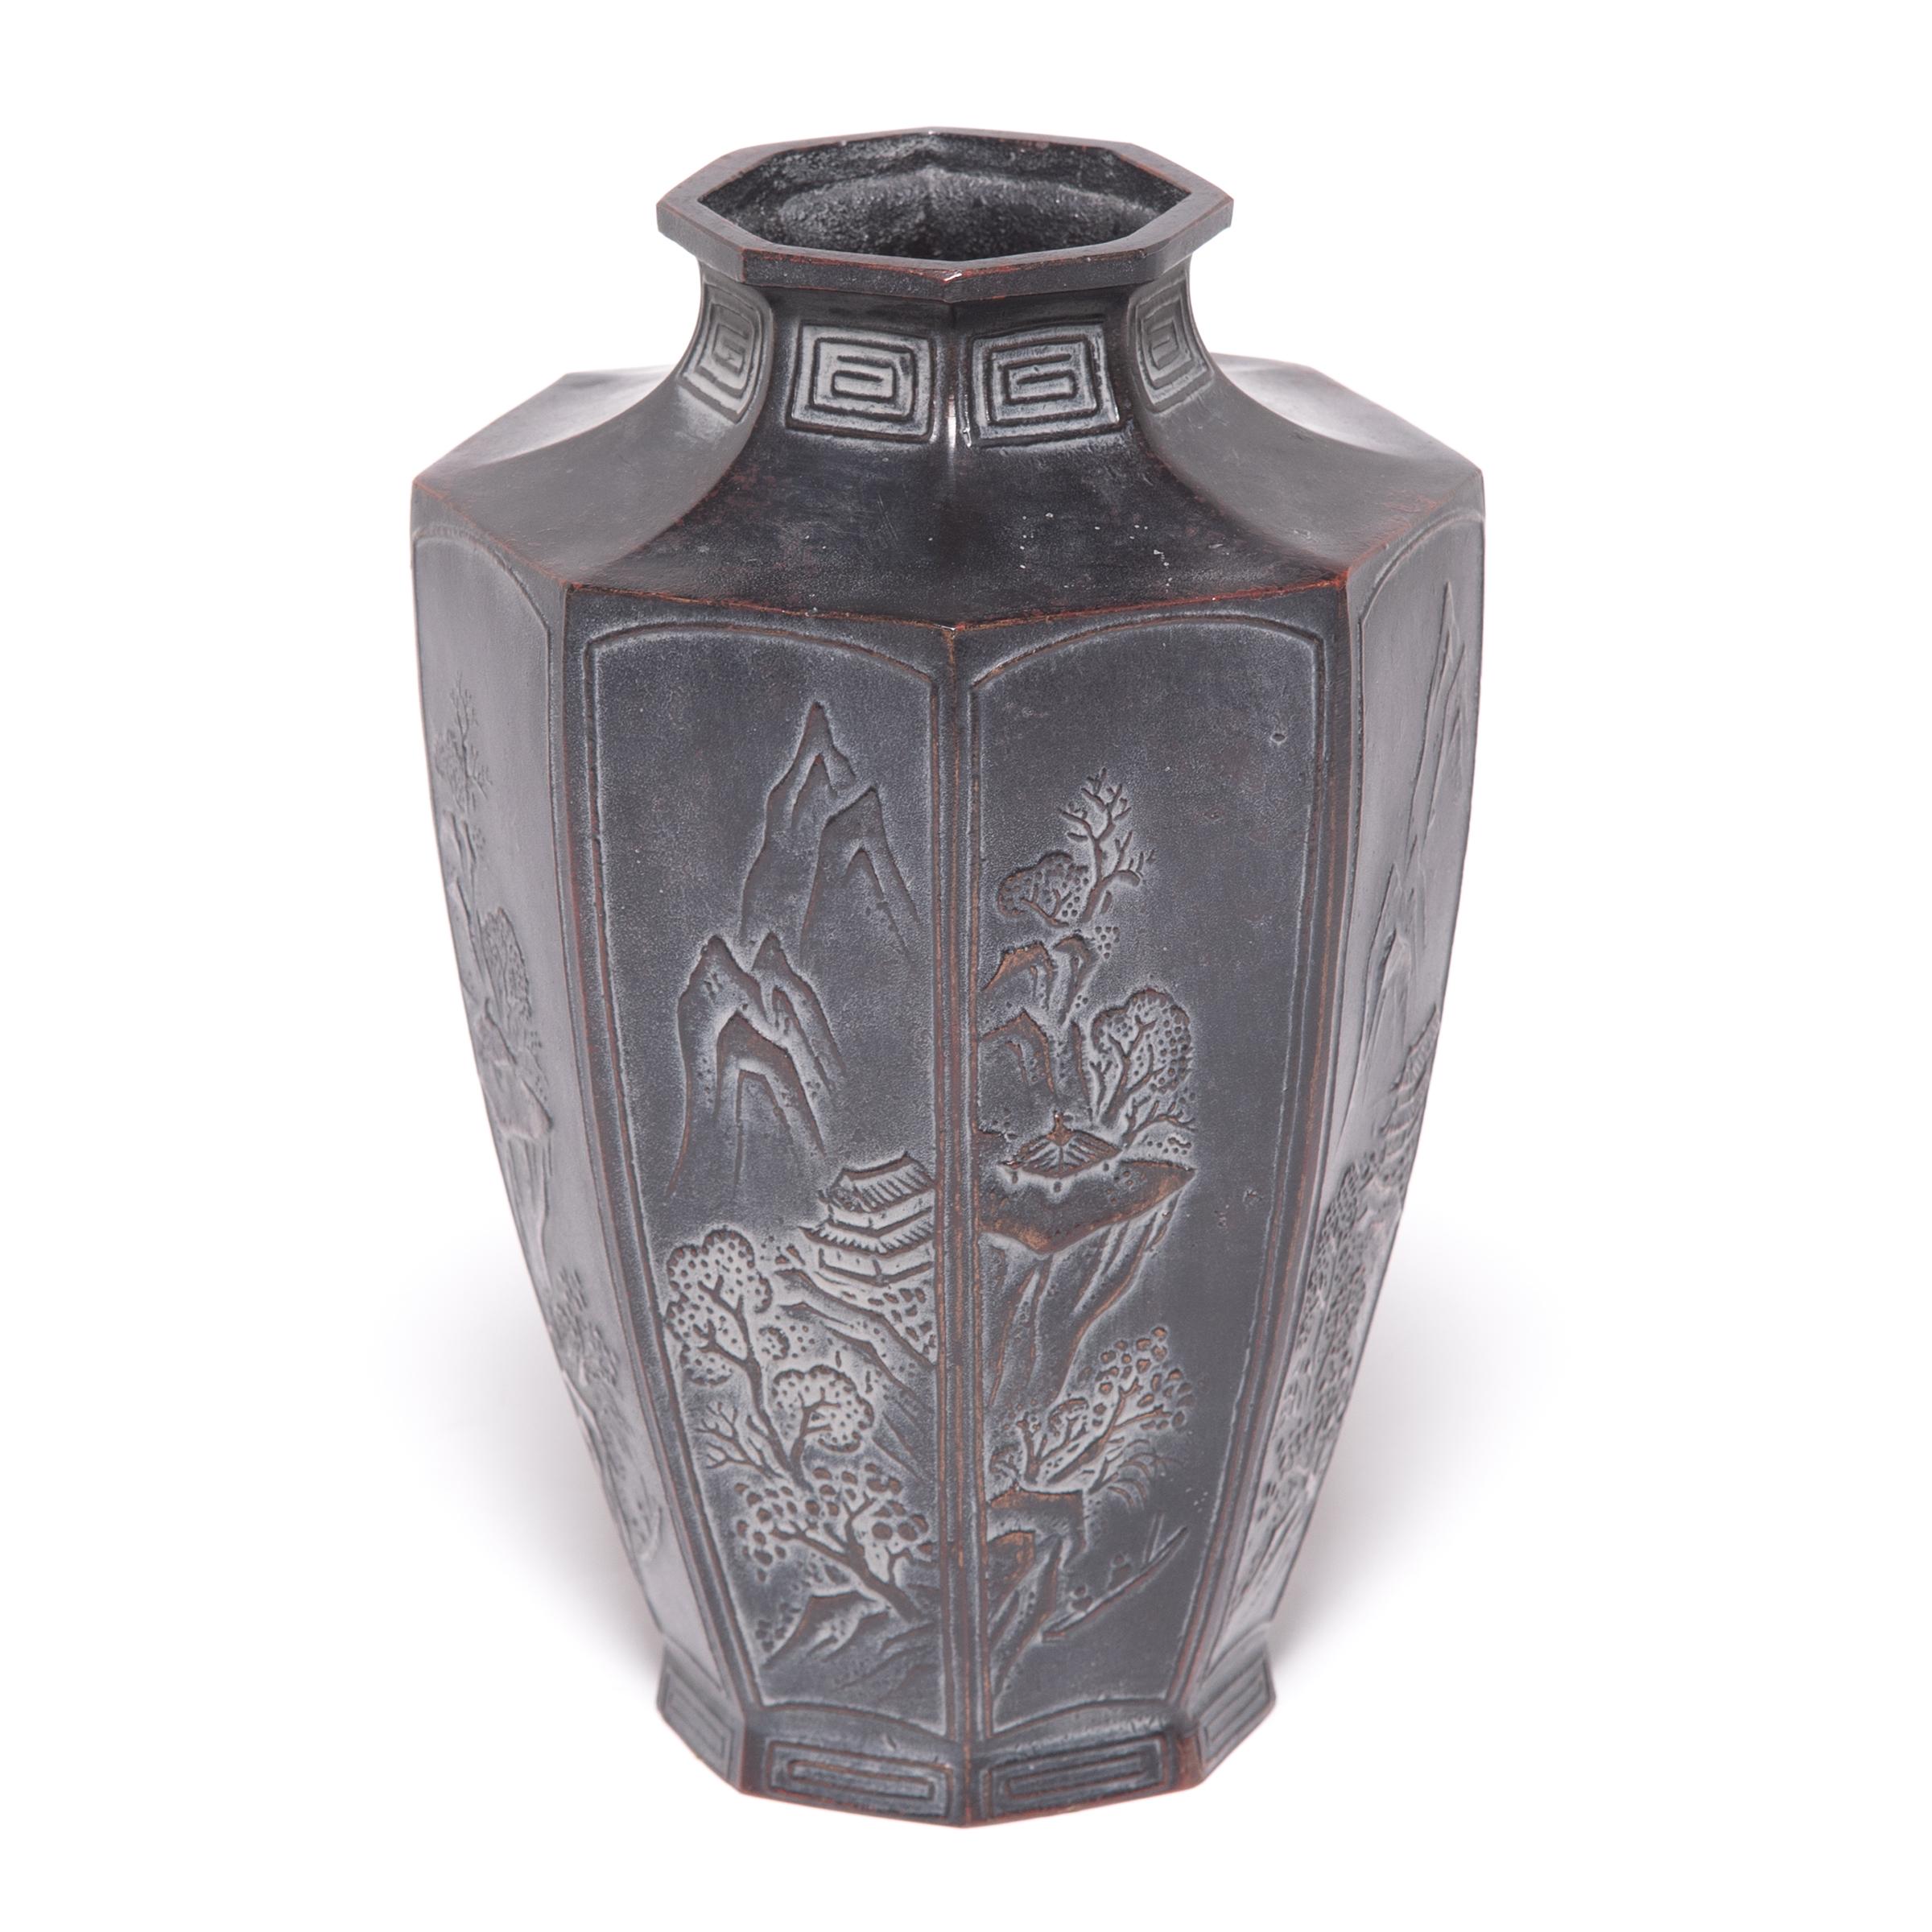 Traditional Japanese metalworkers are renowned for creating specialized alloys that elevated the art of refining, molding, and casting metals. An alloy of zinc and copper gives this octagonal vase its rich dark color, intricately decorated with